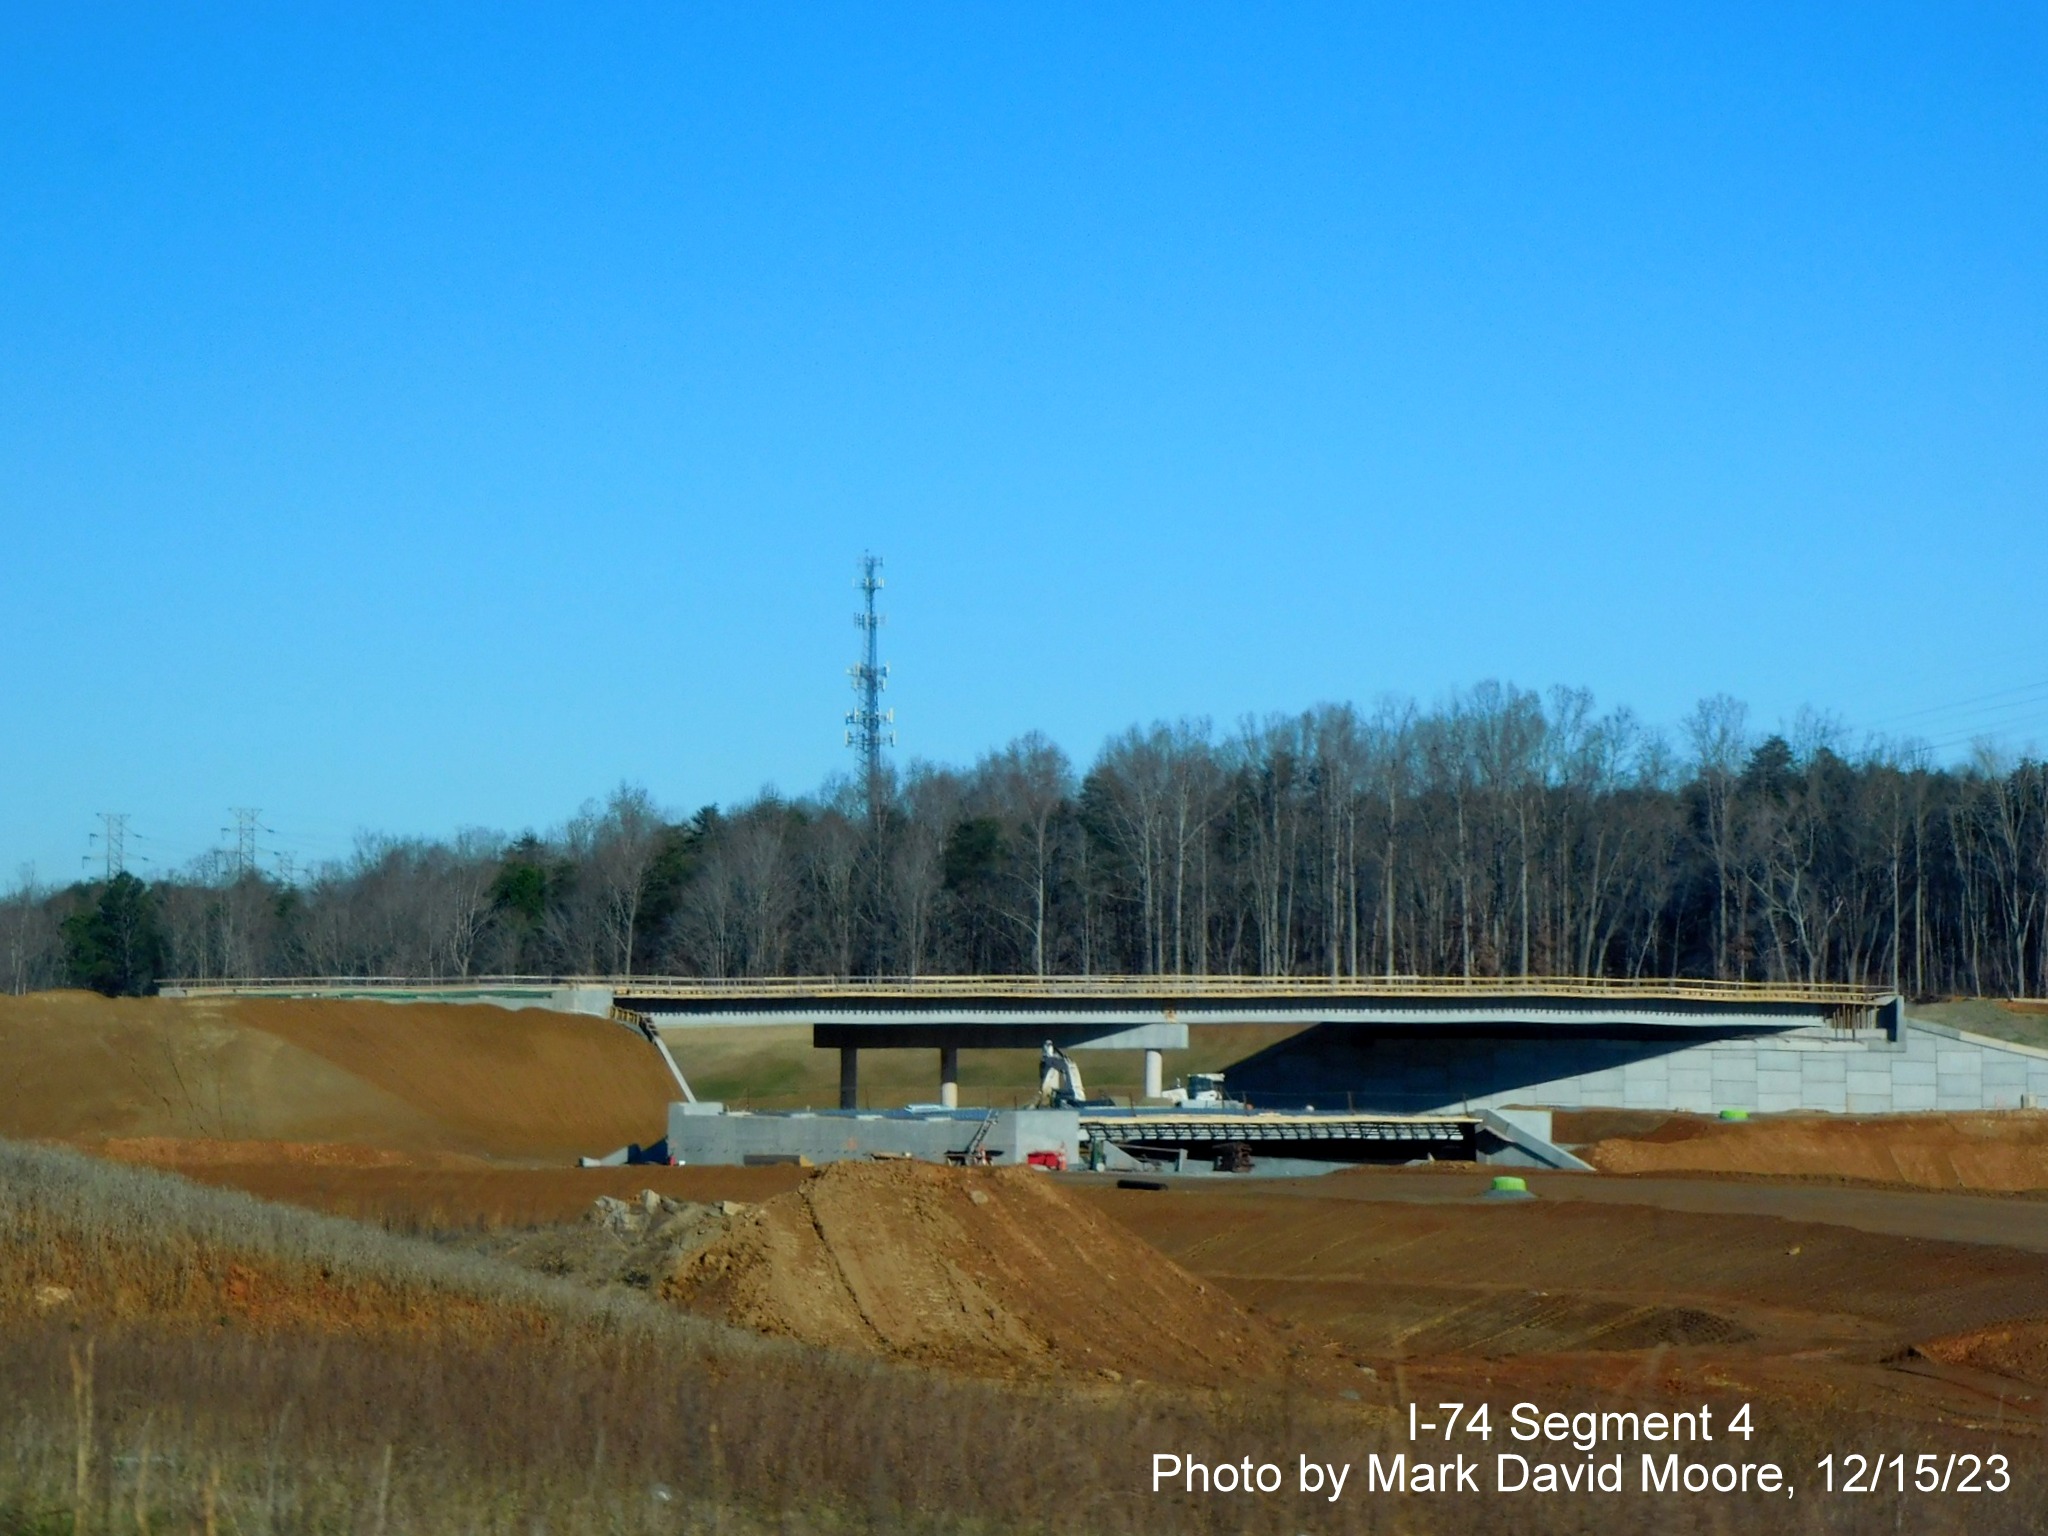 Image from US 52 North of future ramp construction from NC 74 West to US 52 South and work
        on the future NC 74 East roadway, by Mark David Moore, December 2023